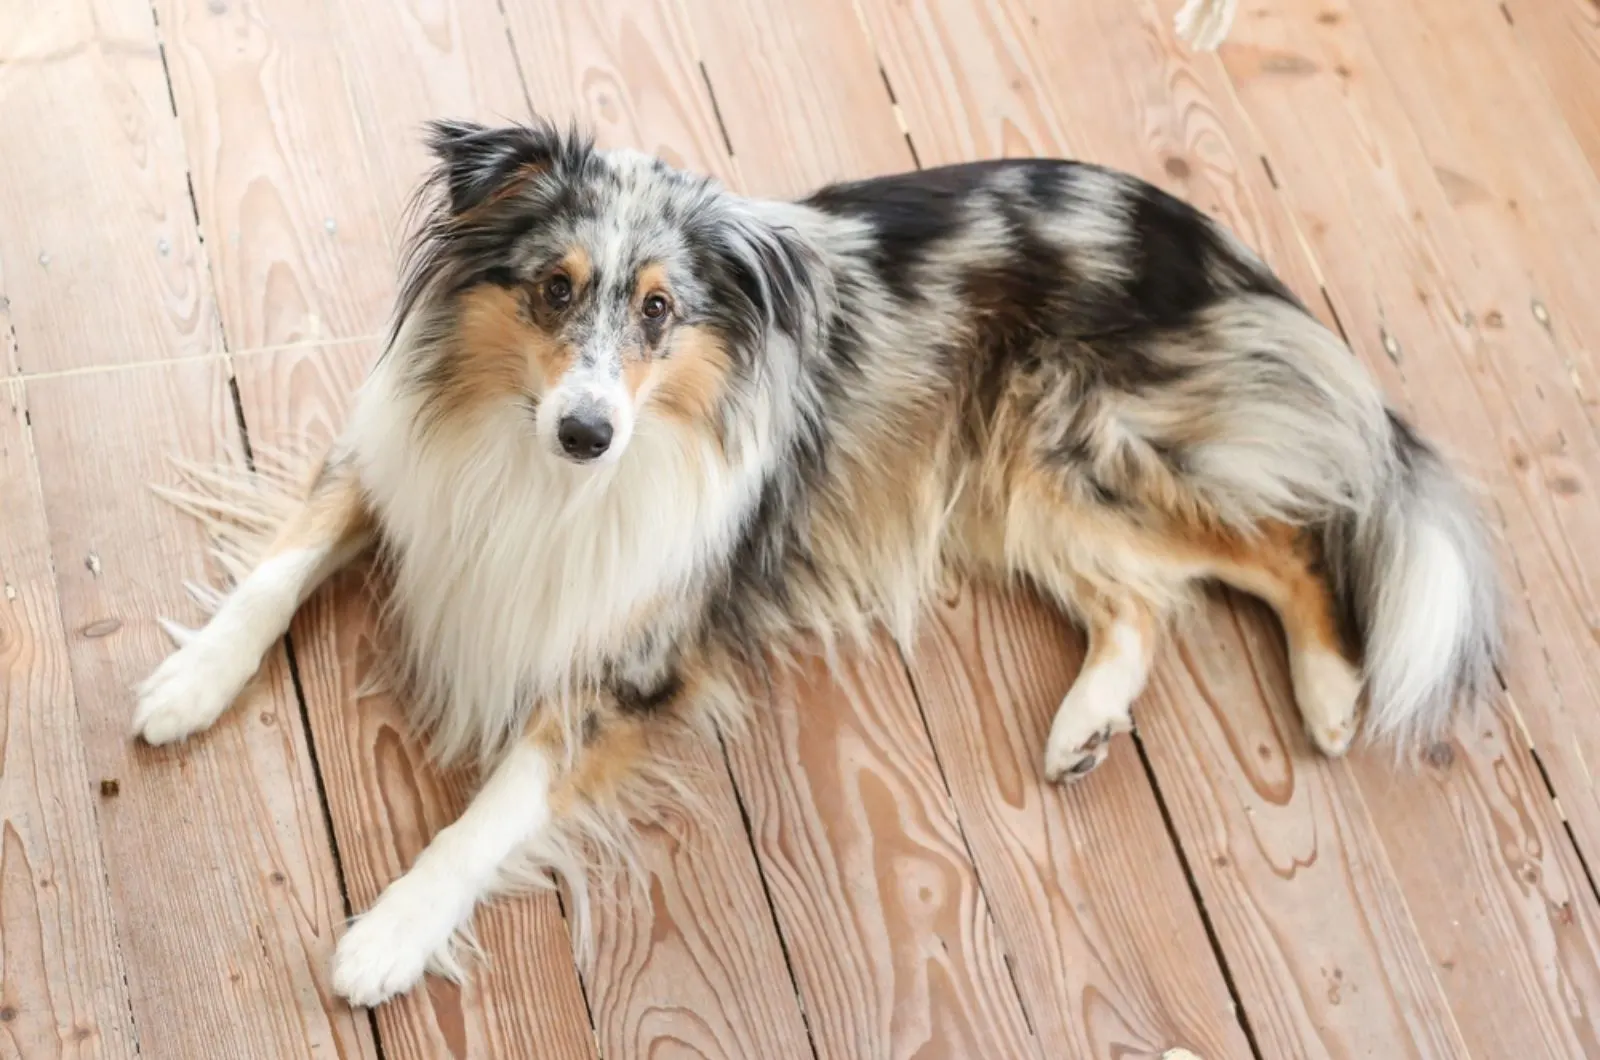 blue merle shetland sheepdog lying on wooden floor and looking into camera